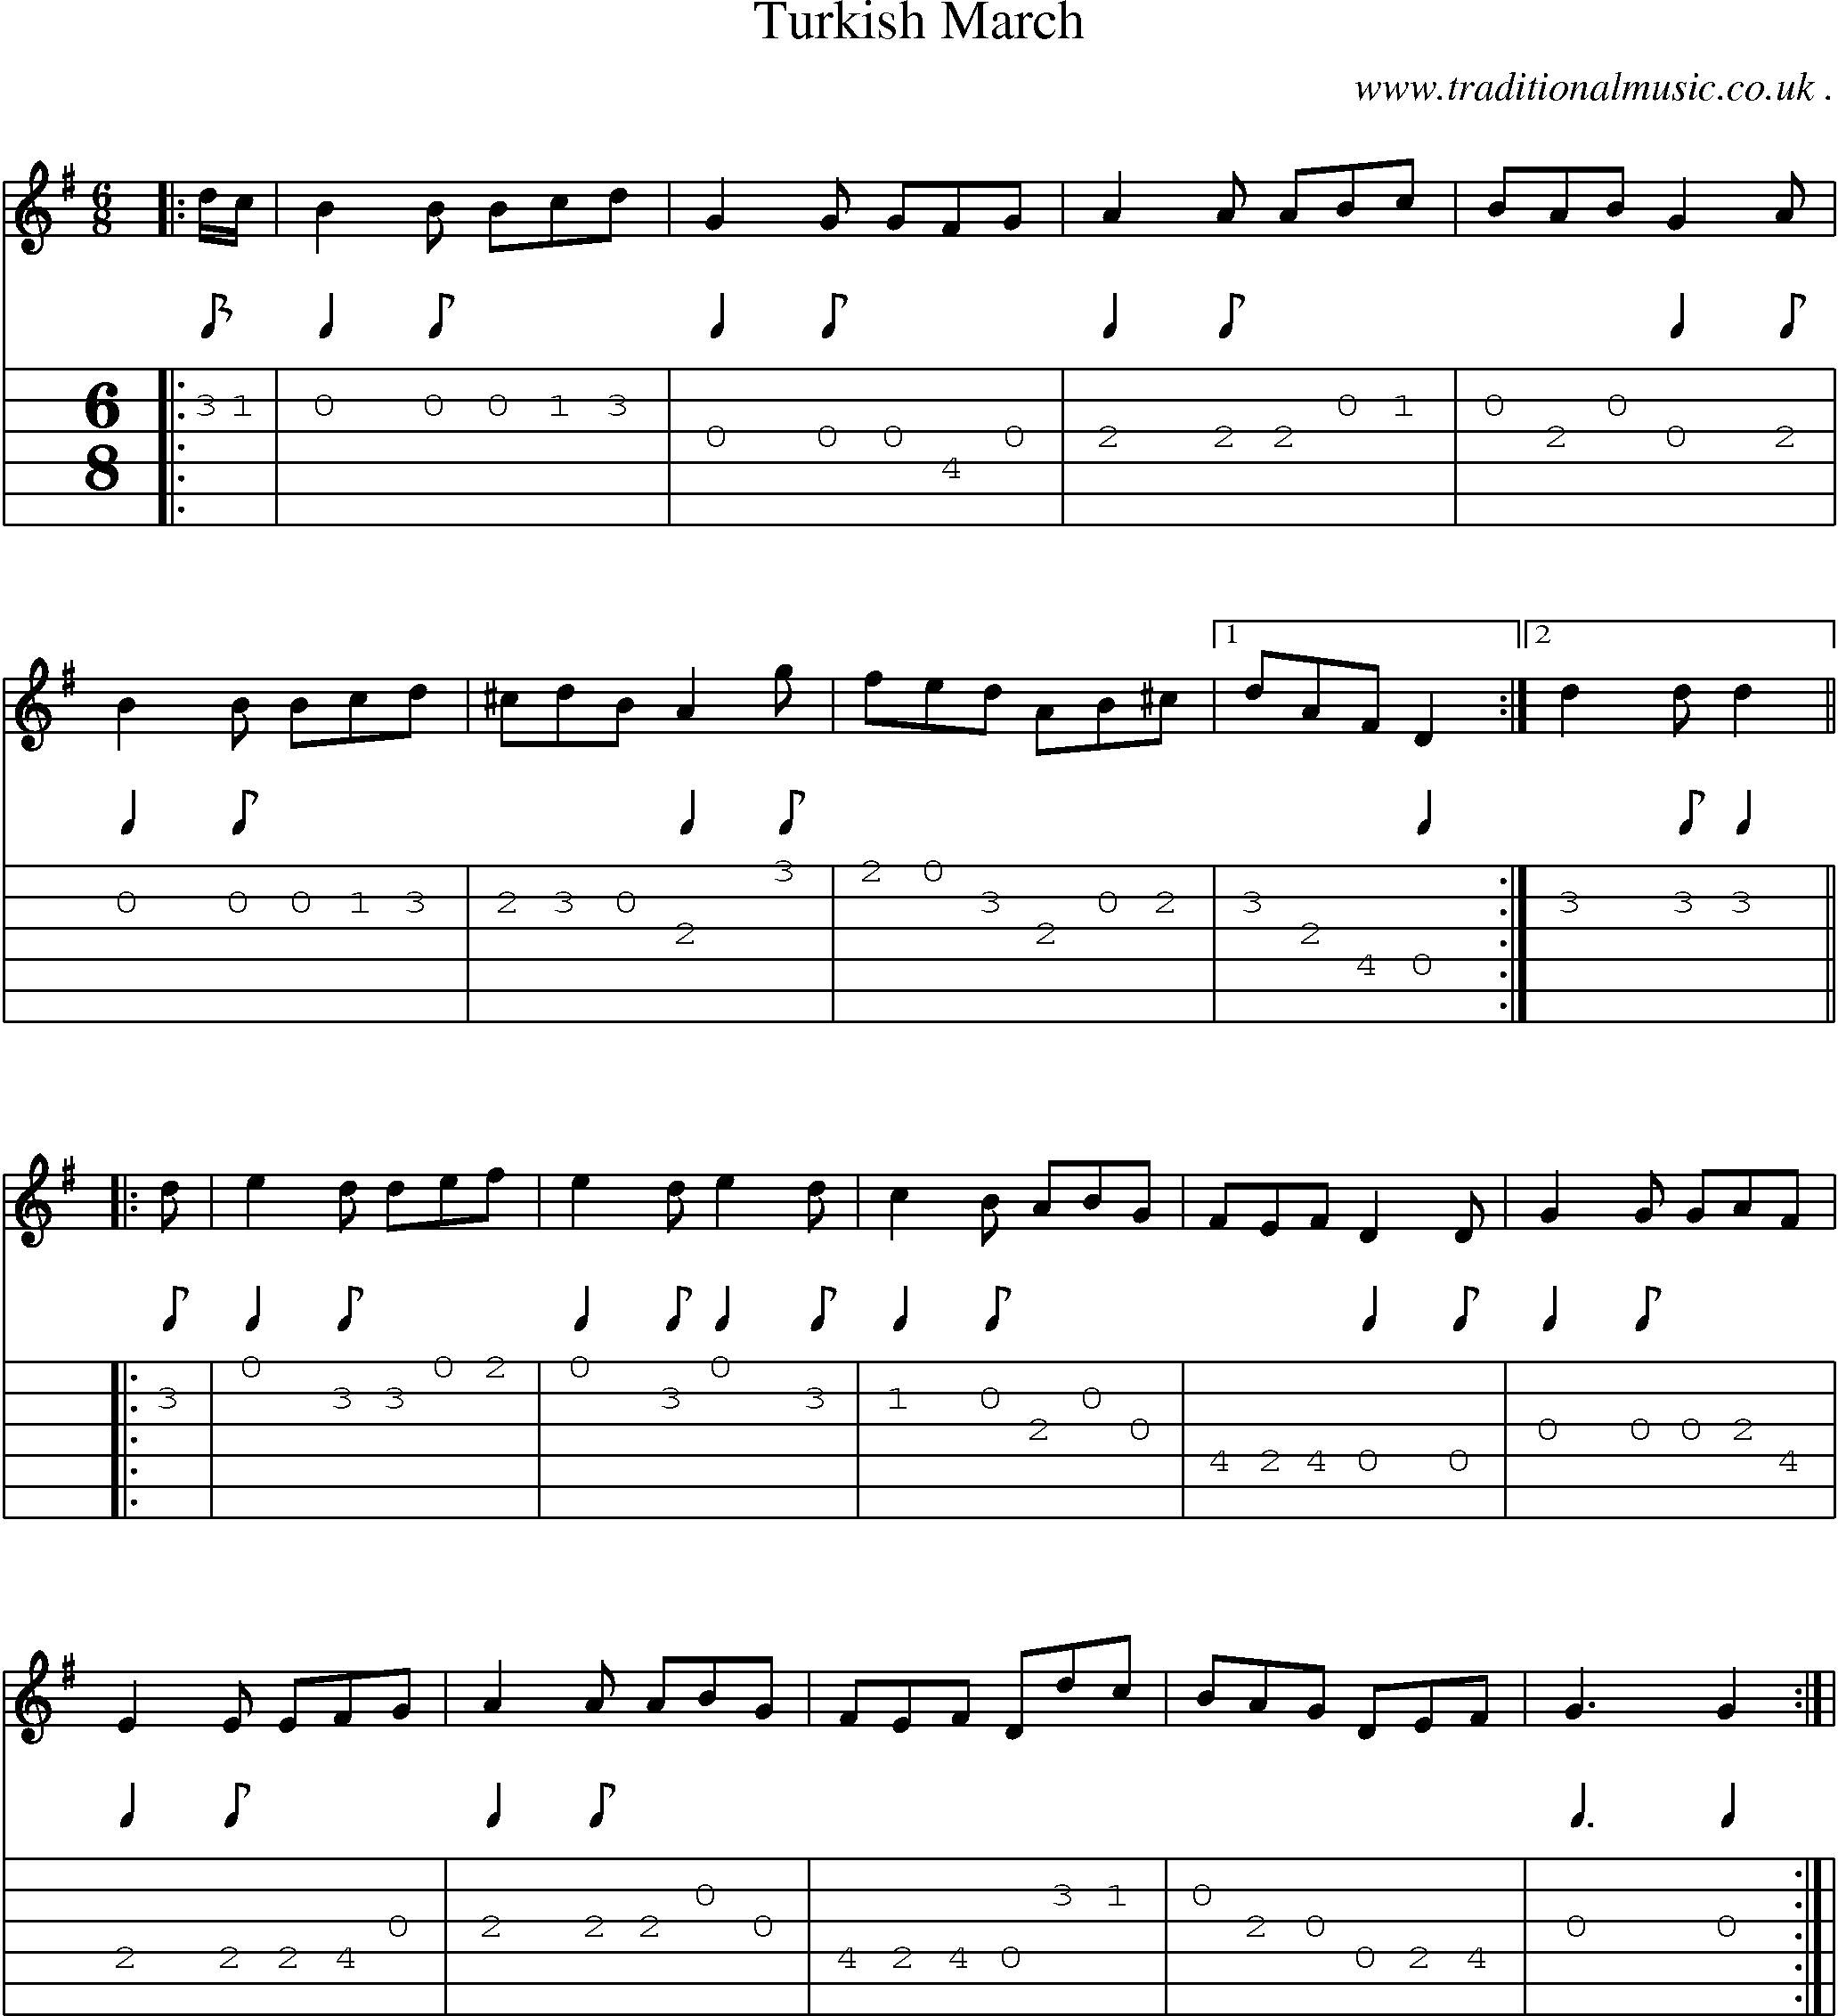 Sheet-Music and Guitar Tabs for Turkish March